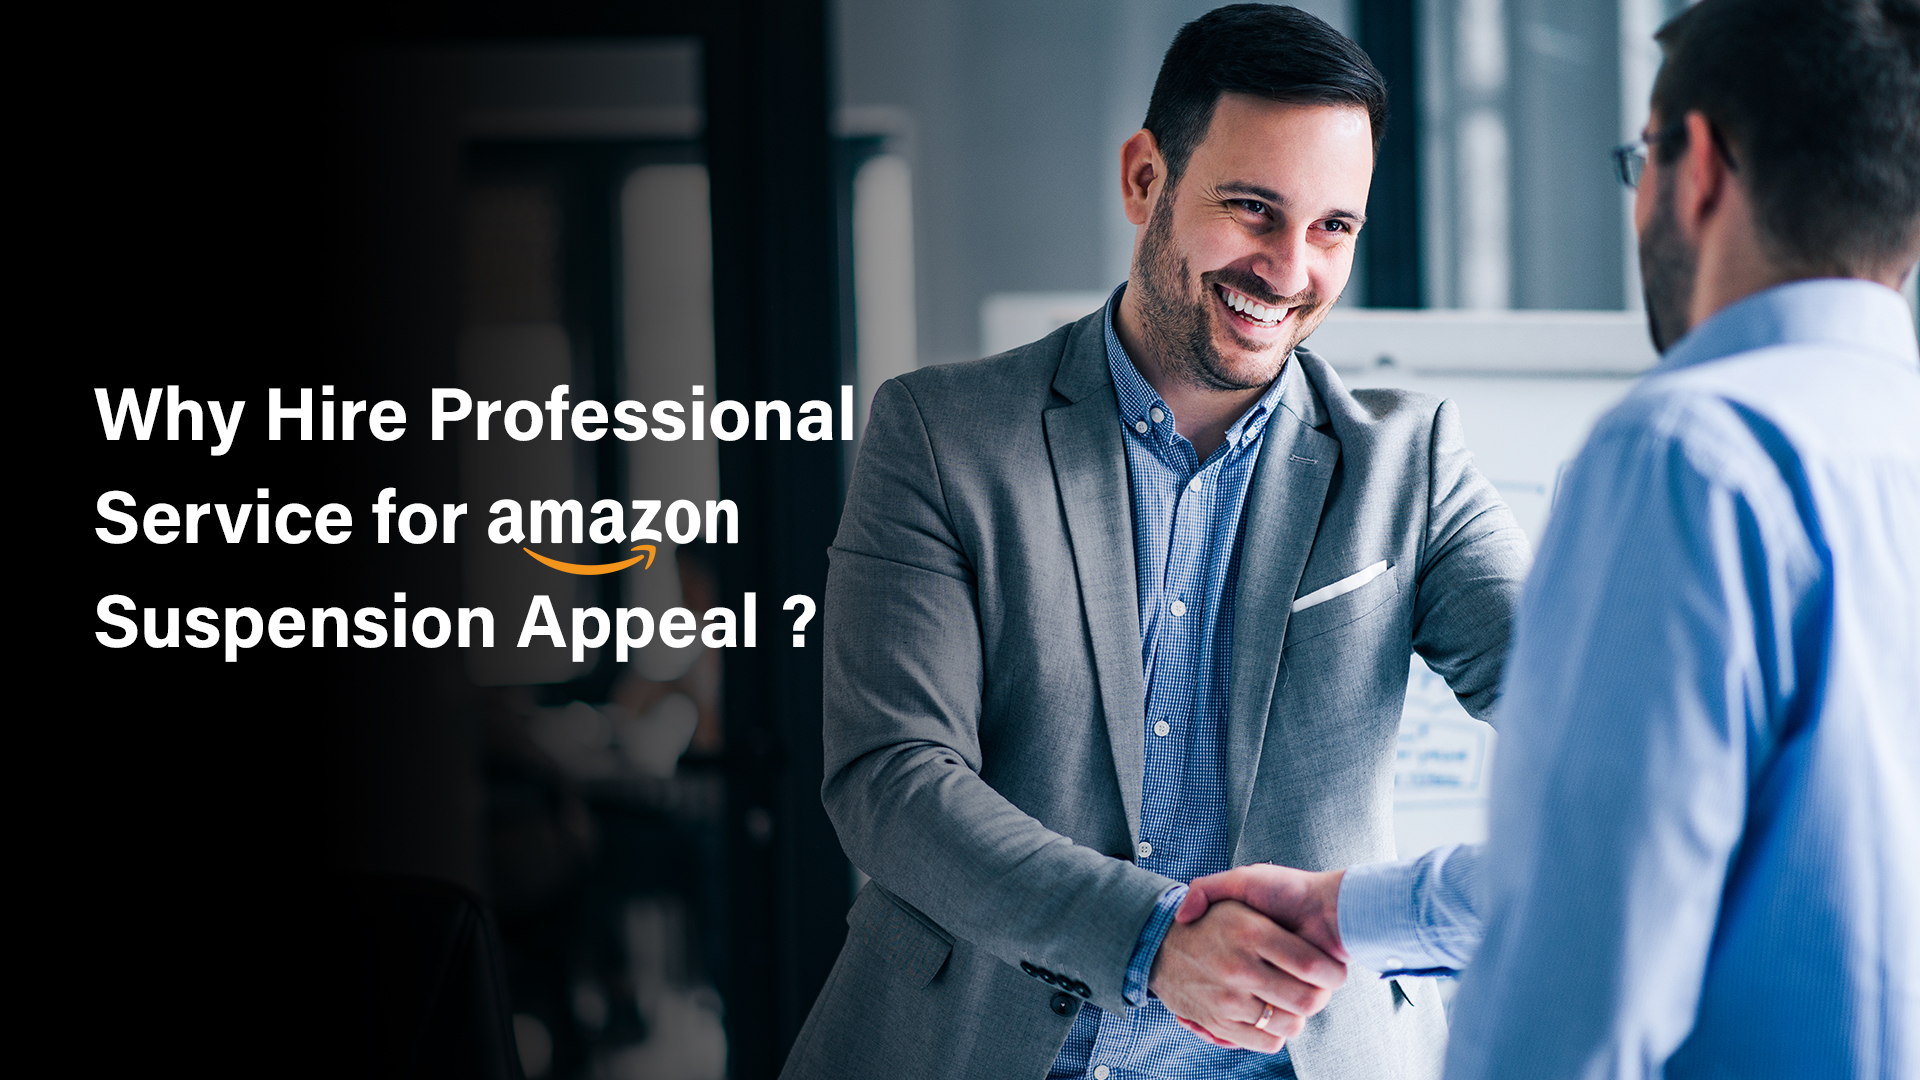 Why Hire Professional Service for Amazon Suspension Appeal?